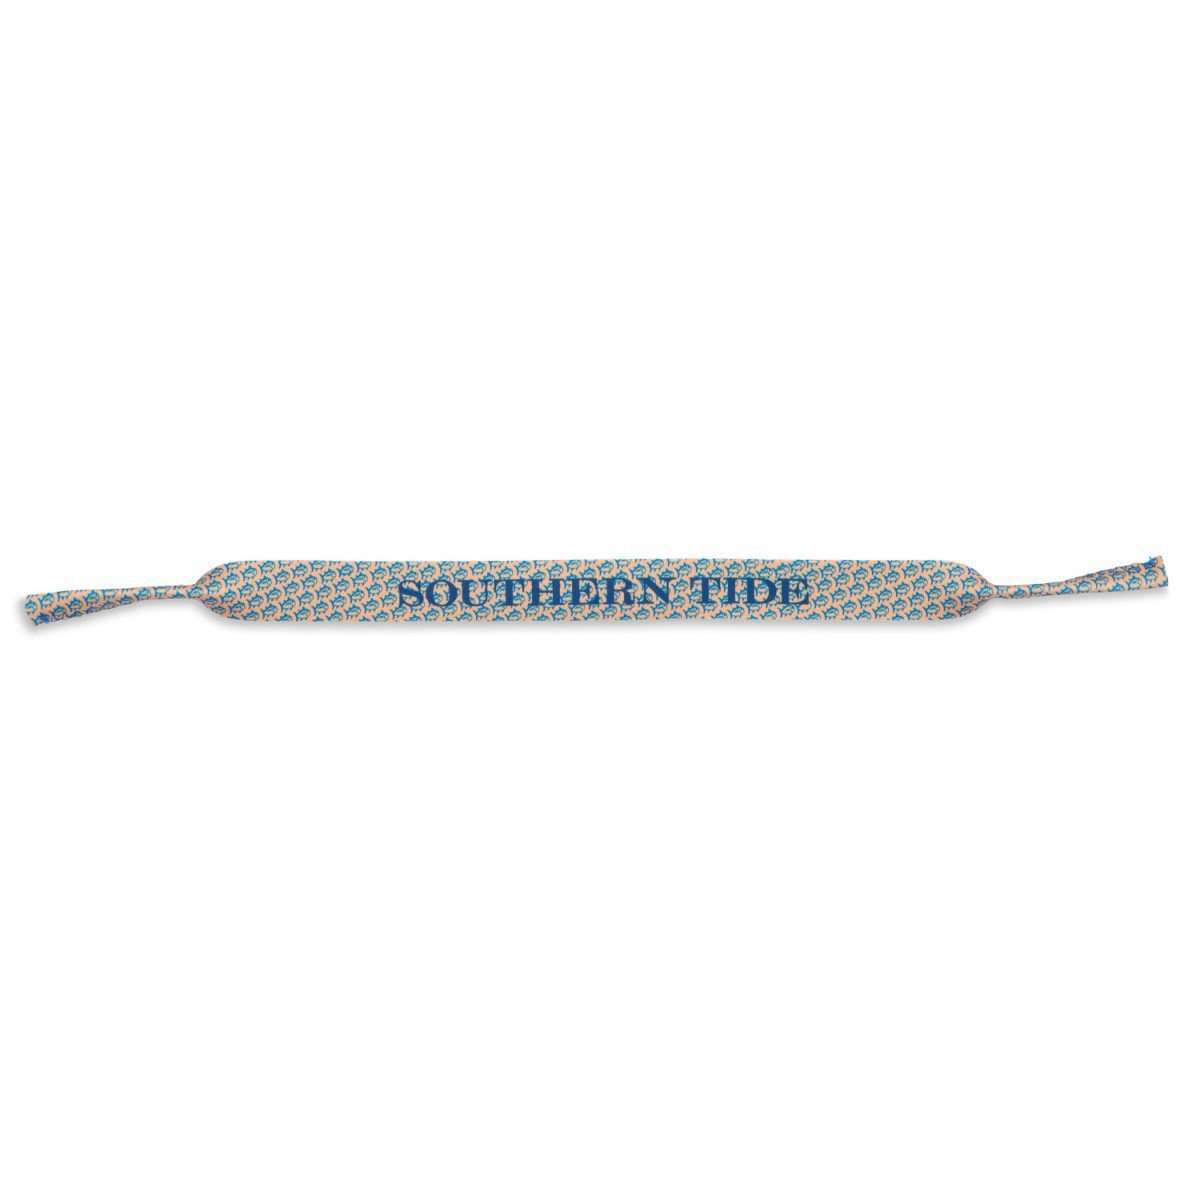 School of Fish Sunglass Straps in Orange by Southern Tide - Country Club Prep